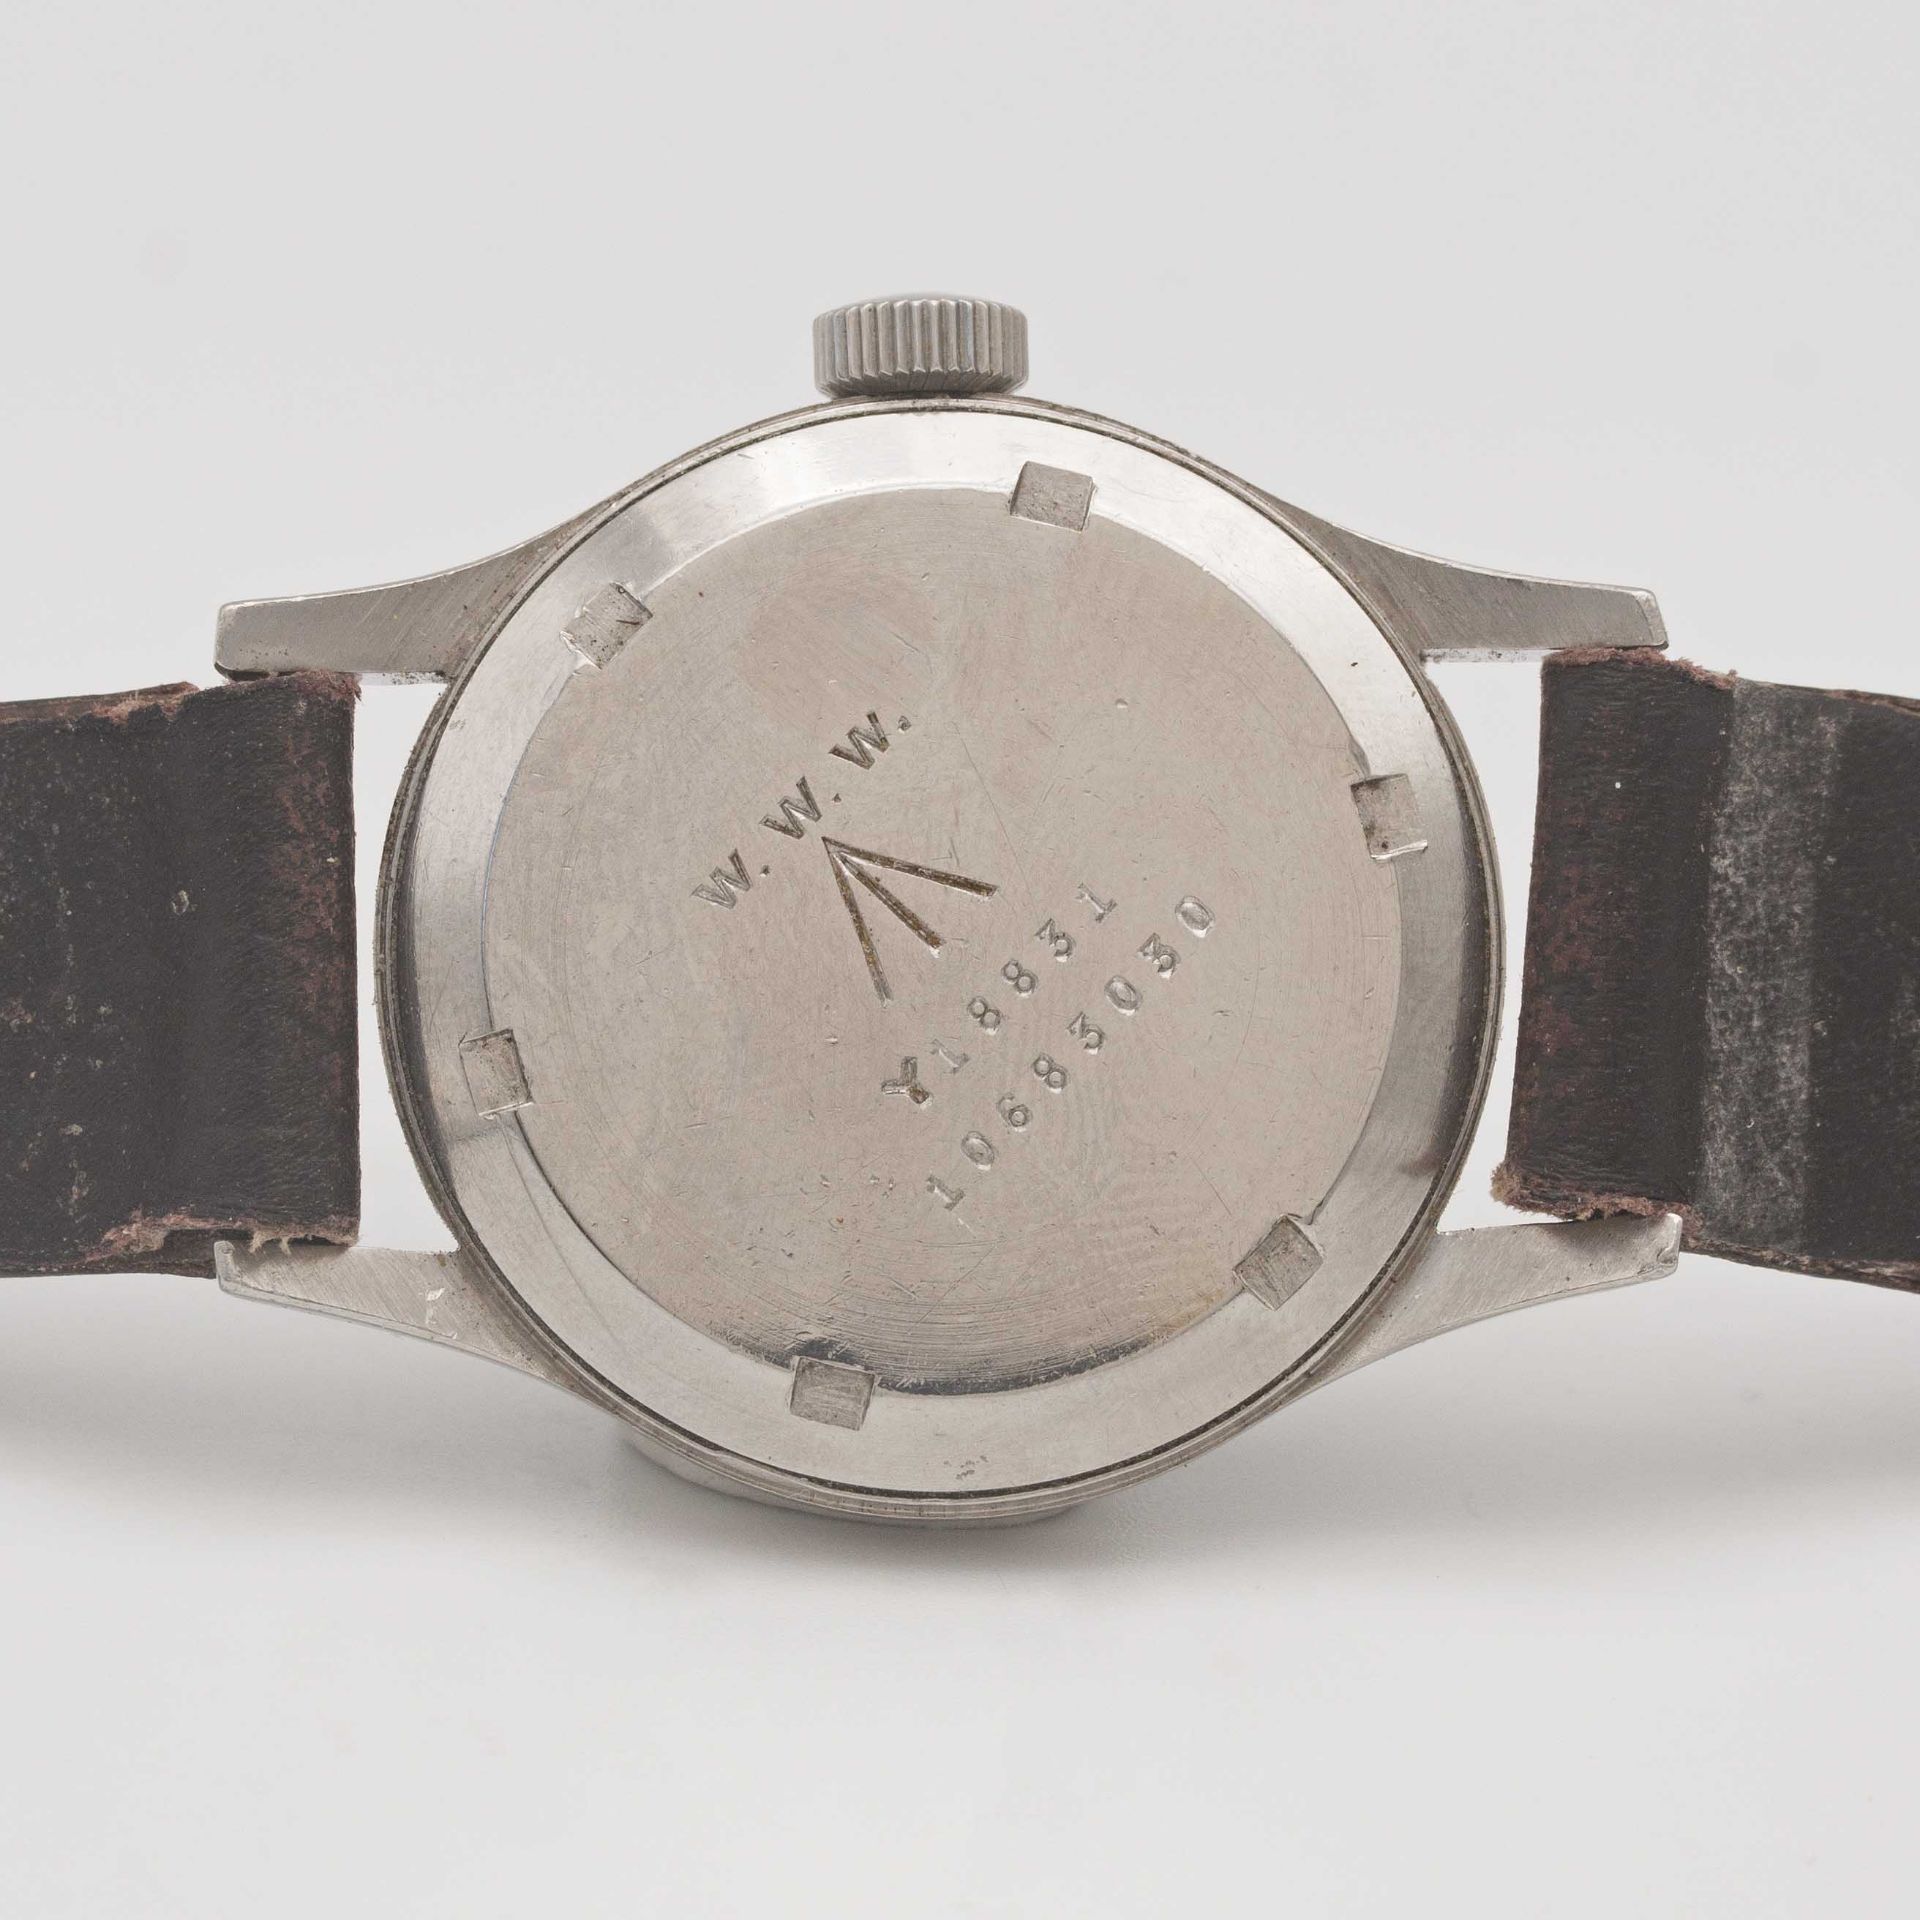 A GENTLEMAN'S STAINLESS STEEL BRITISH MILITARY OMEGA W.W.W. WRIST WATCH CIRCA 1945, PART OF THE " - Image 6 of 9